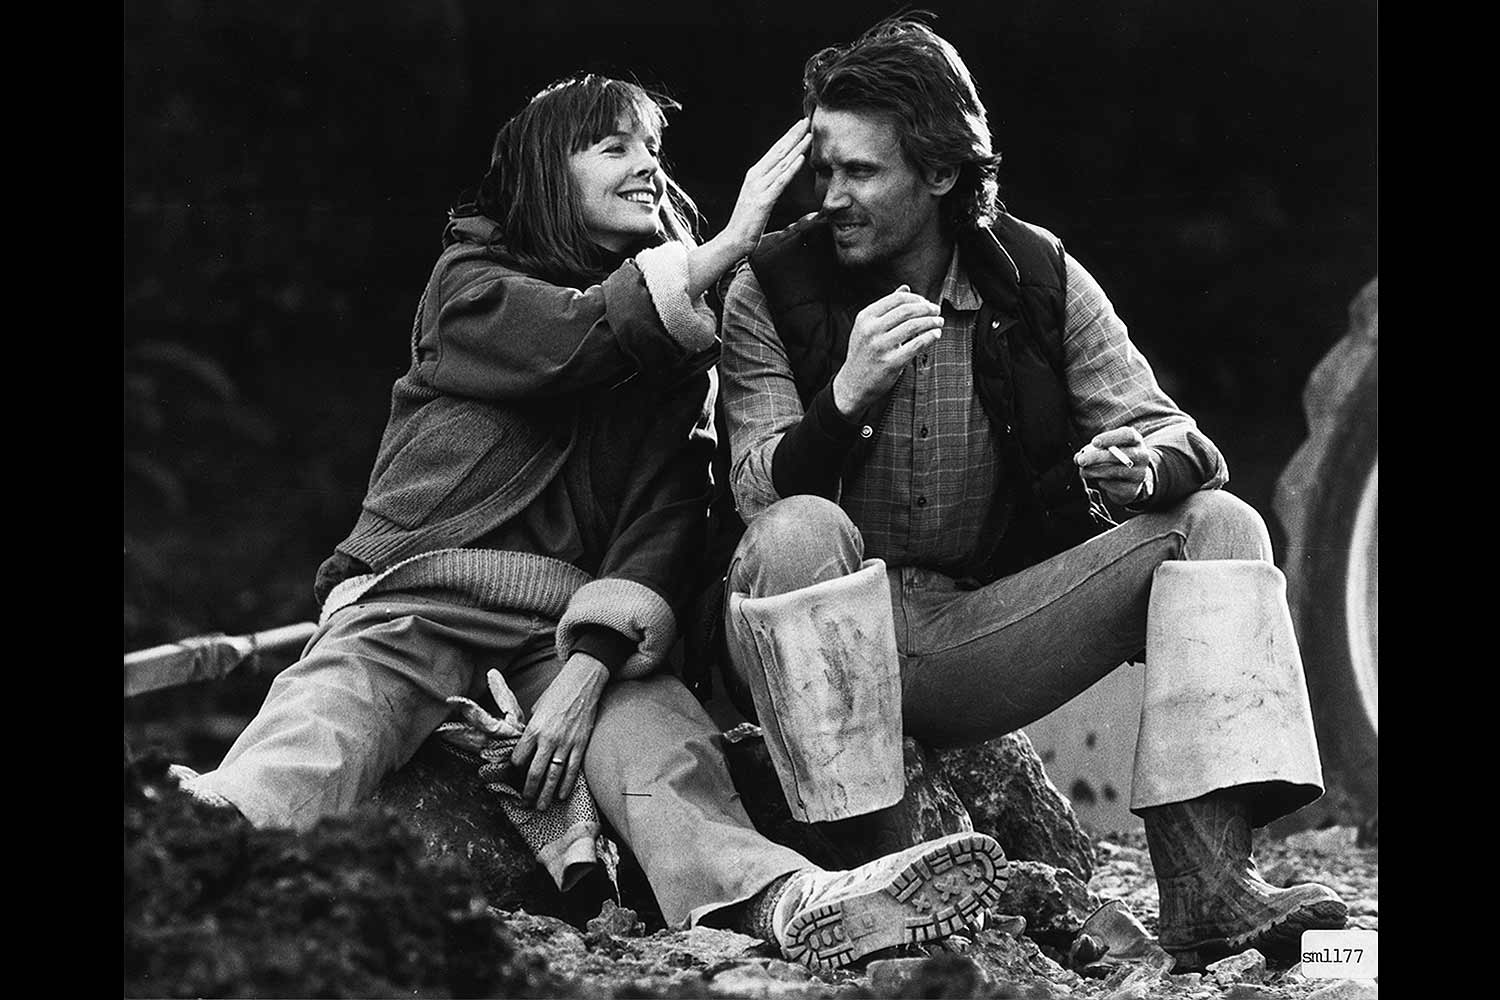 Diane Keaton and Peter Weller in Shoot the Moon